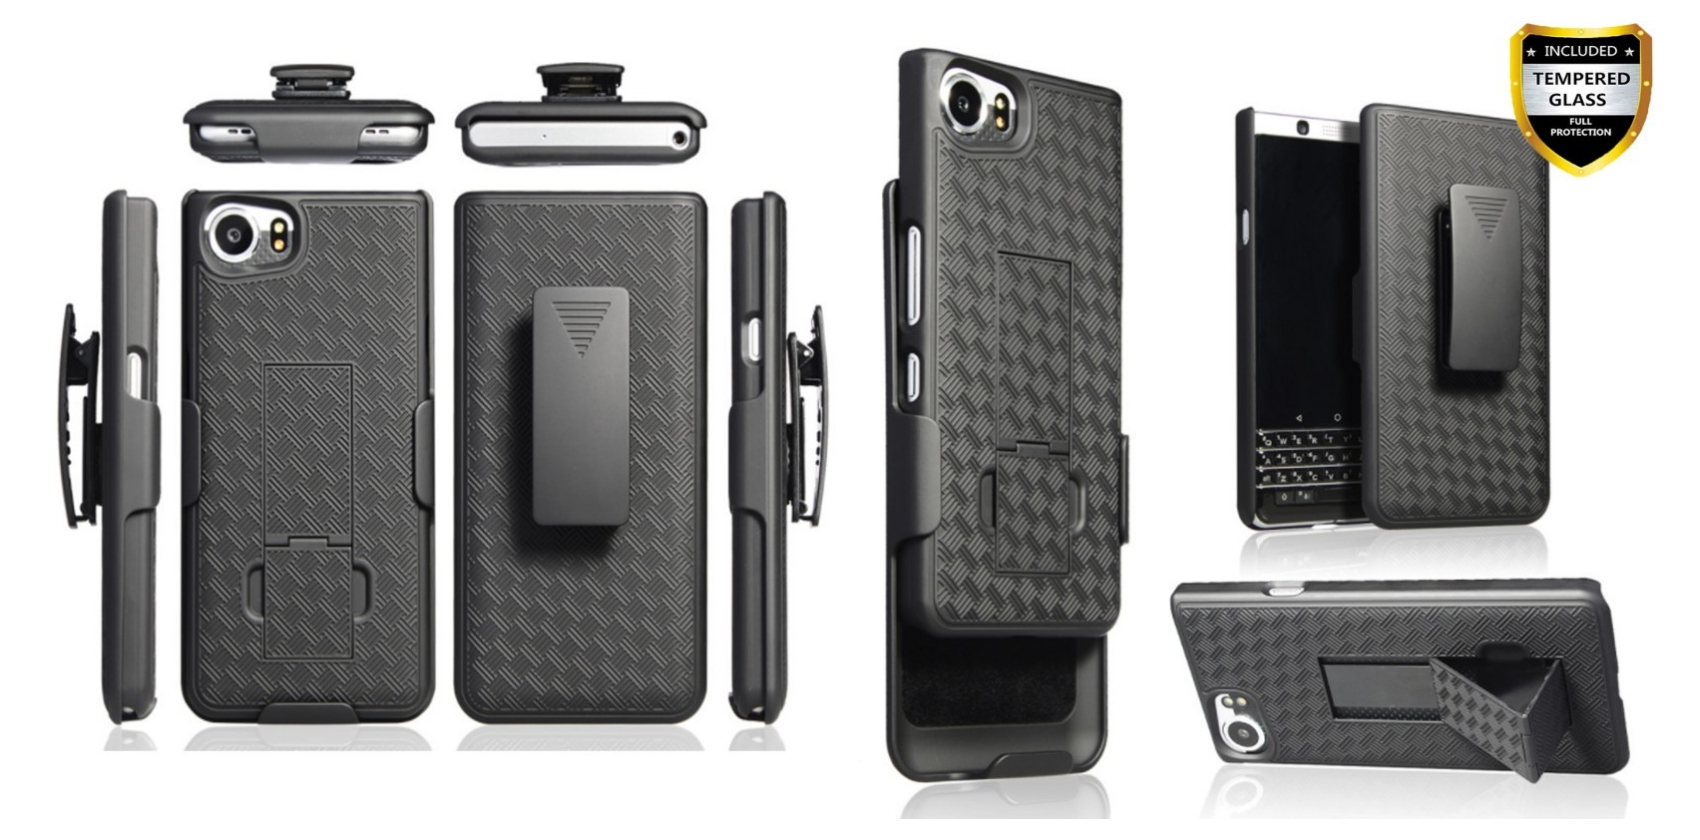 The Best Cases for Your BlackBerry Phones